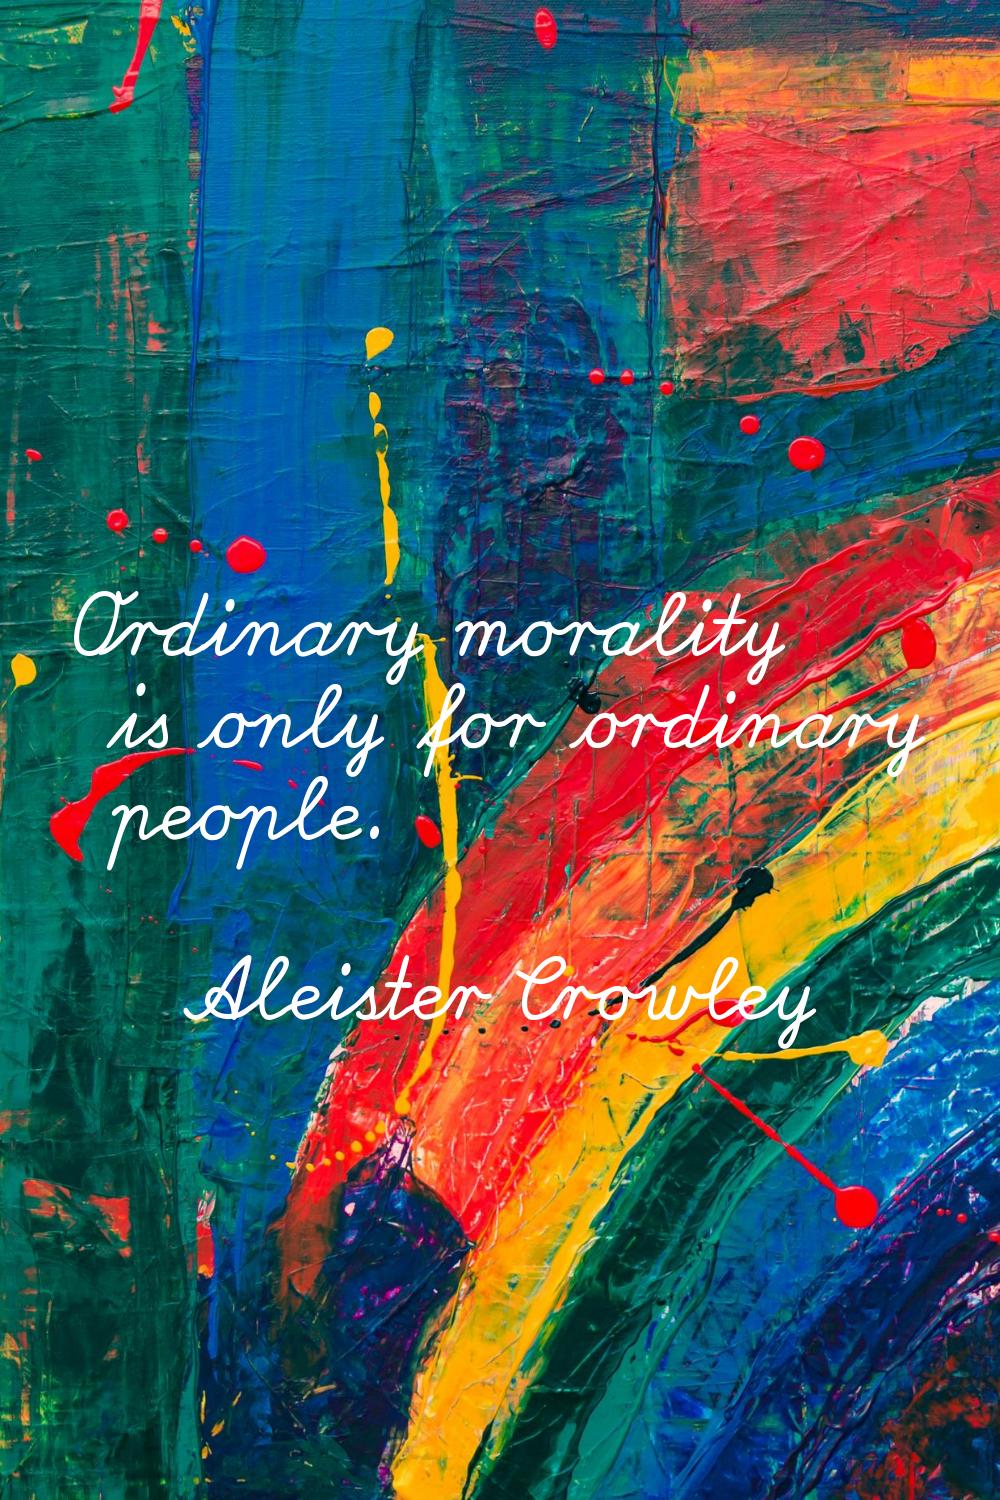 Ordinary morality is only for ordinary people.